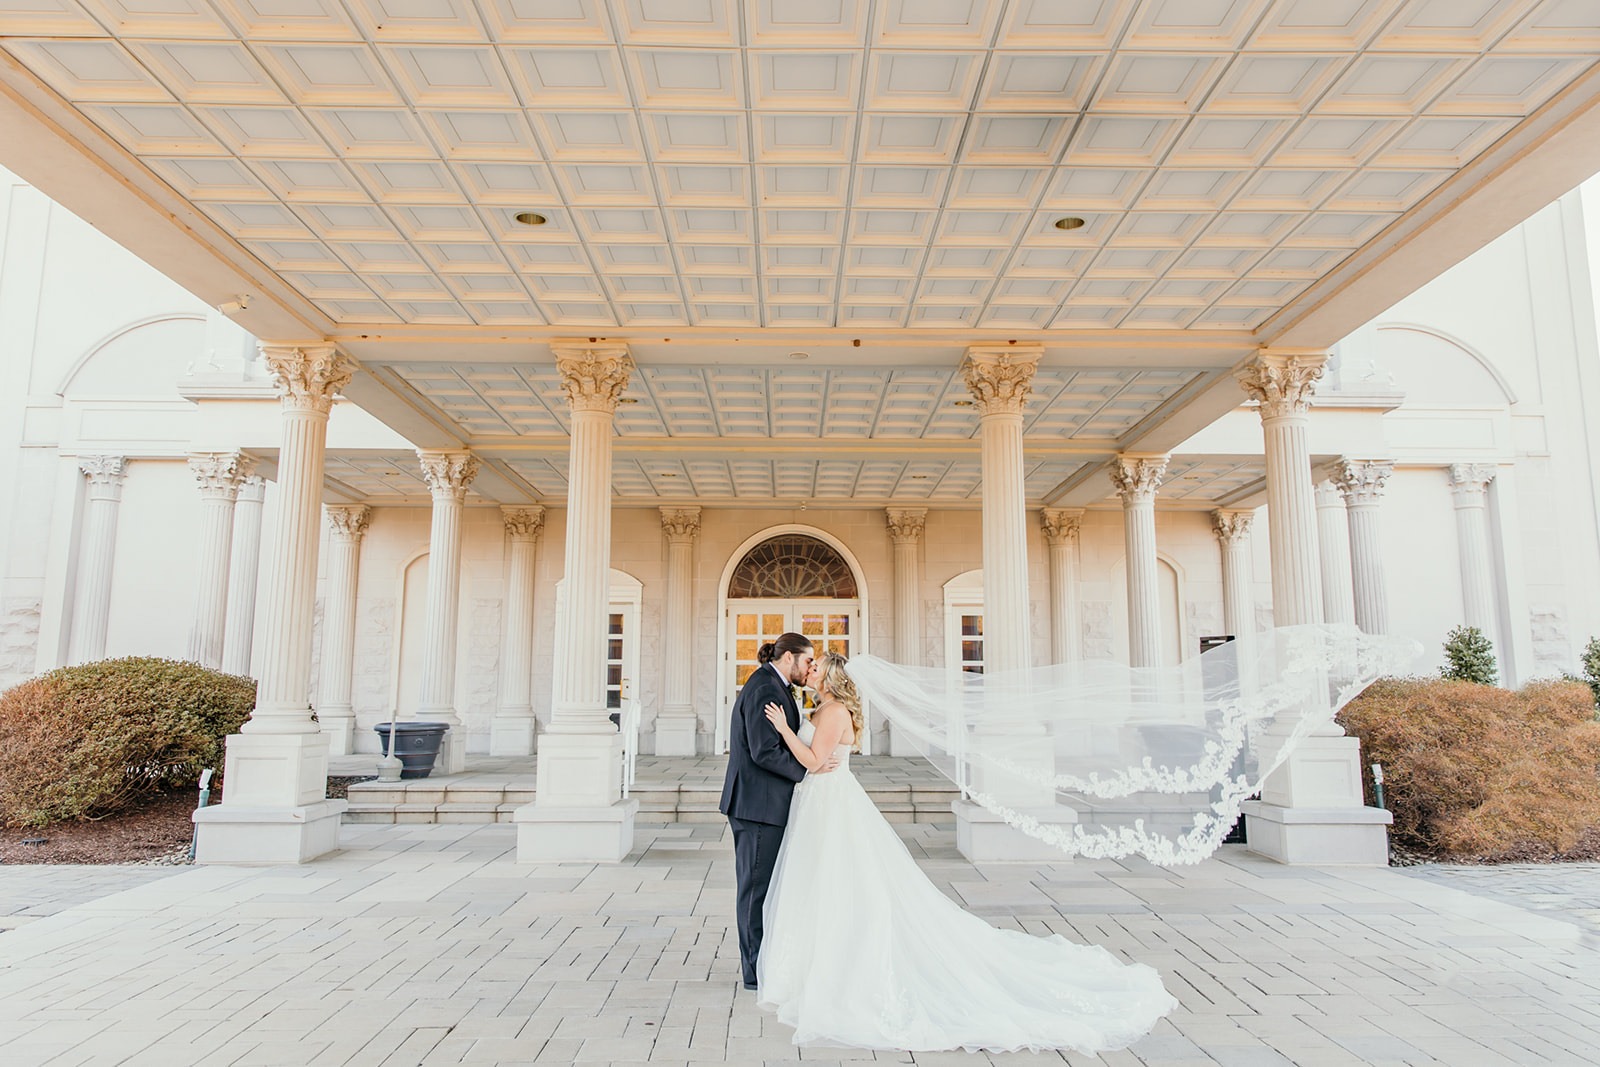 So you just got engaged?! Now what? Come tour NJ Wedding Venue The Palace at Somerset Park